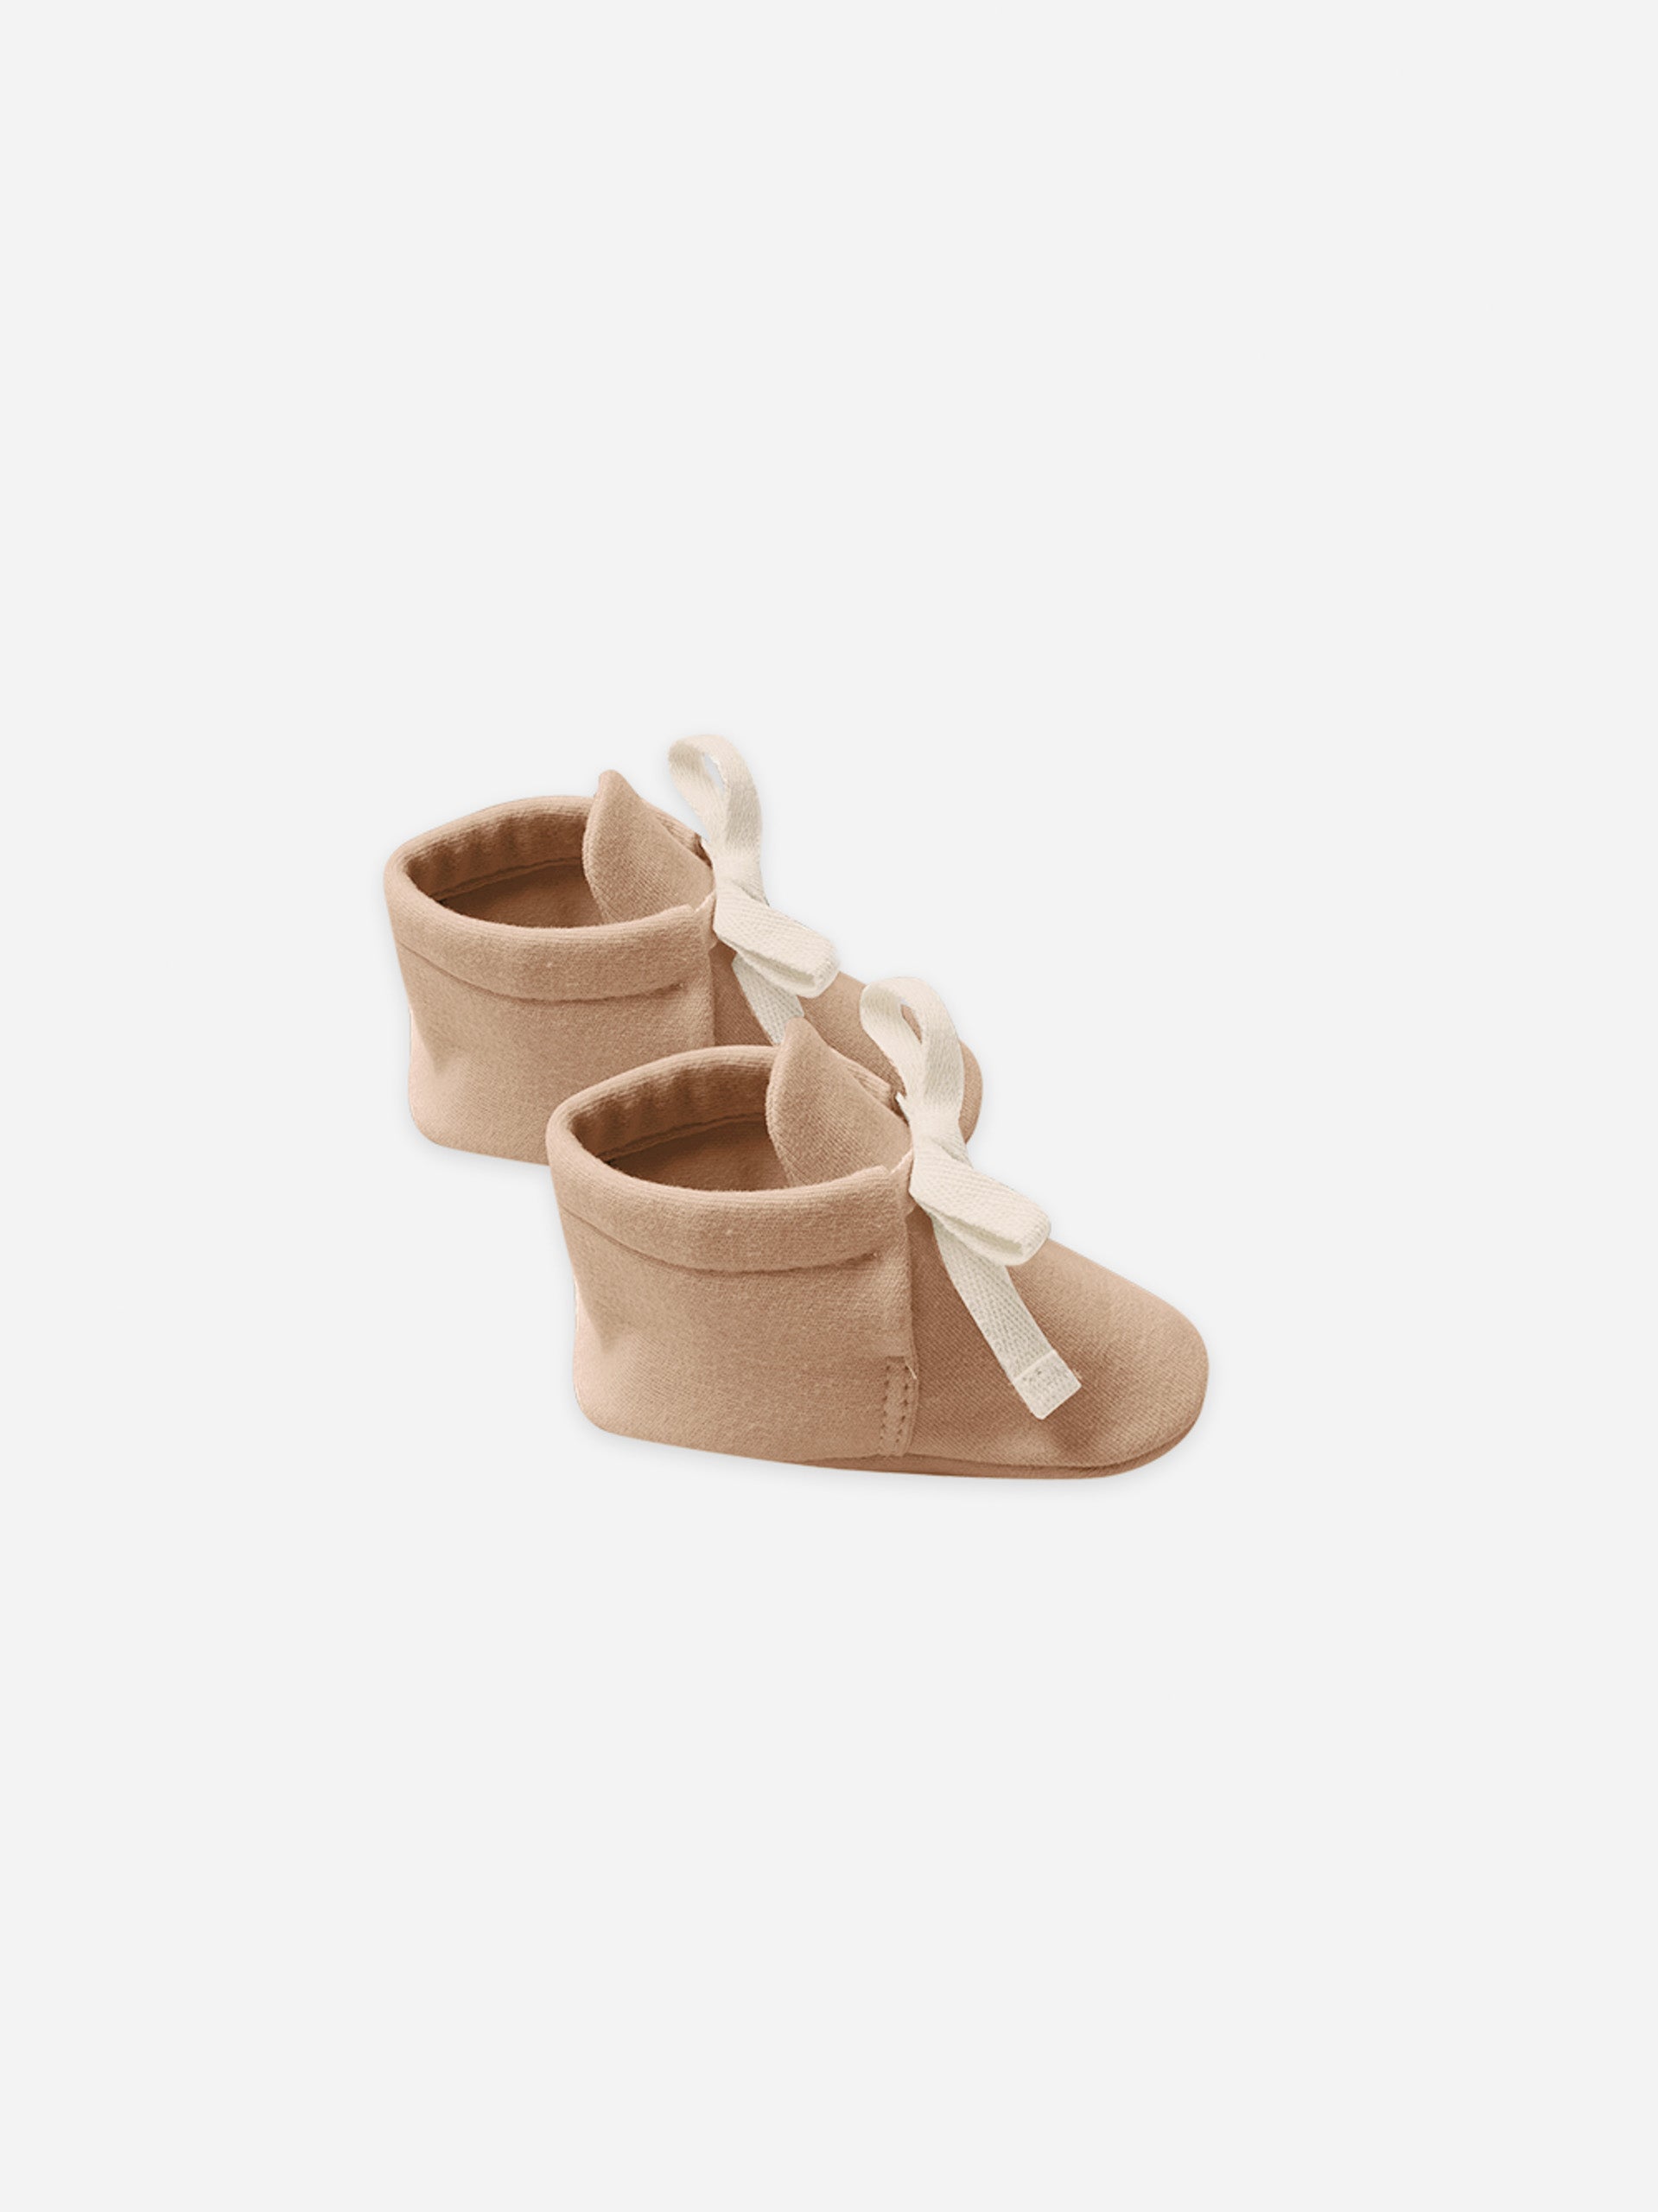 baby booties | apricot - Quincy Mae | Baby Basics | Baby Clothing | Organic Baby Clothes | Modern Baby Boy Clothes |